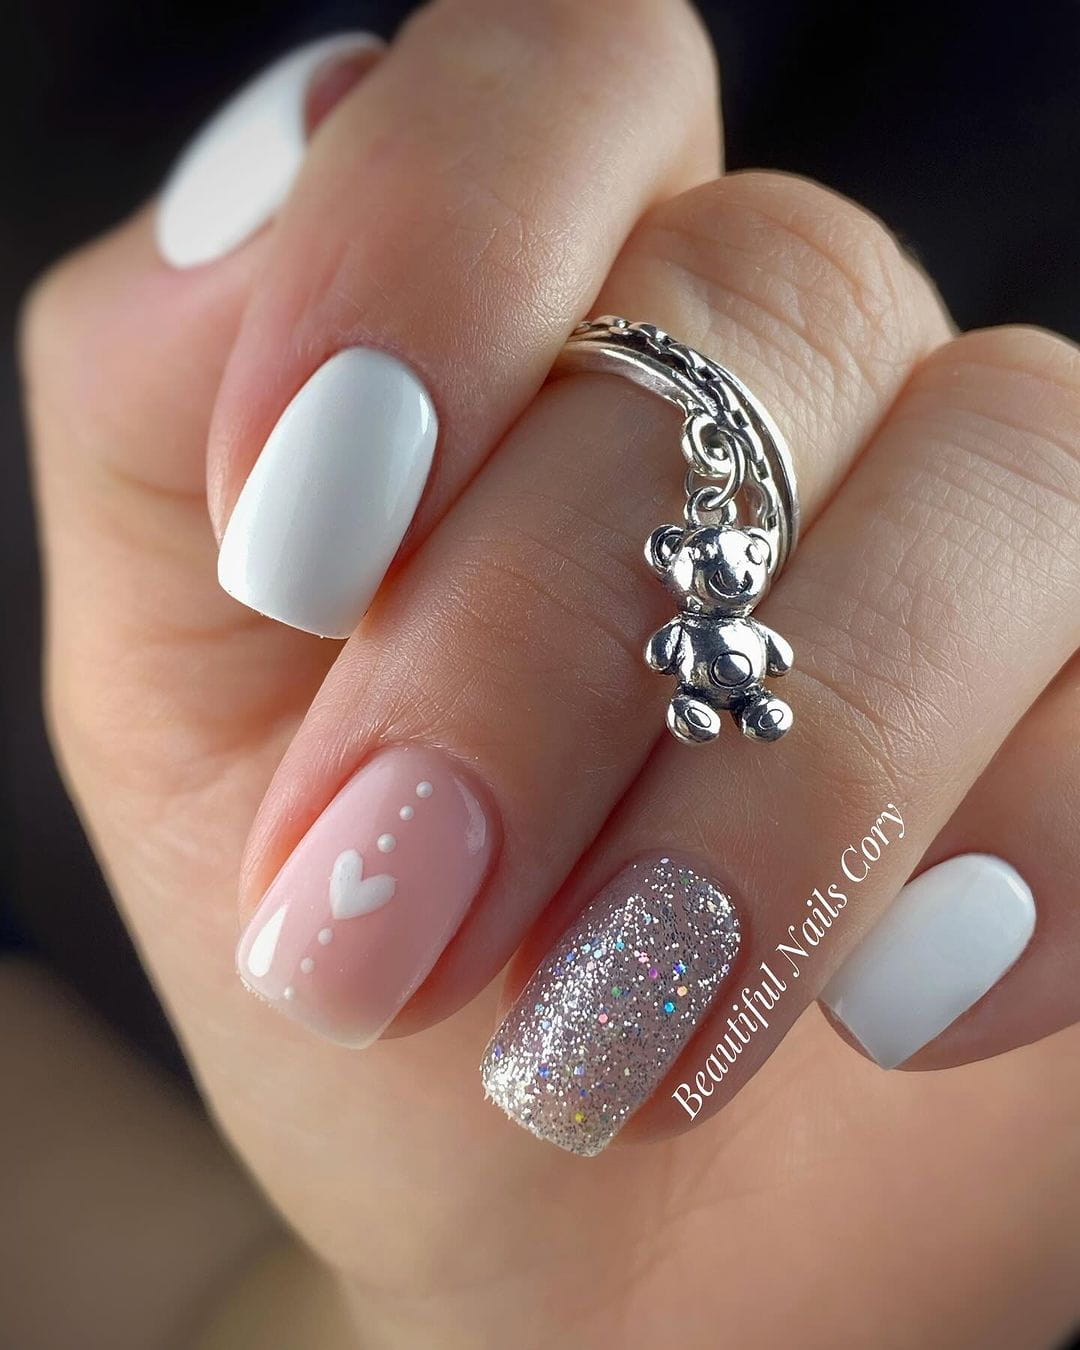 100 Pretty Spring Nail Designs To Try This Year images 84